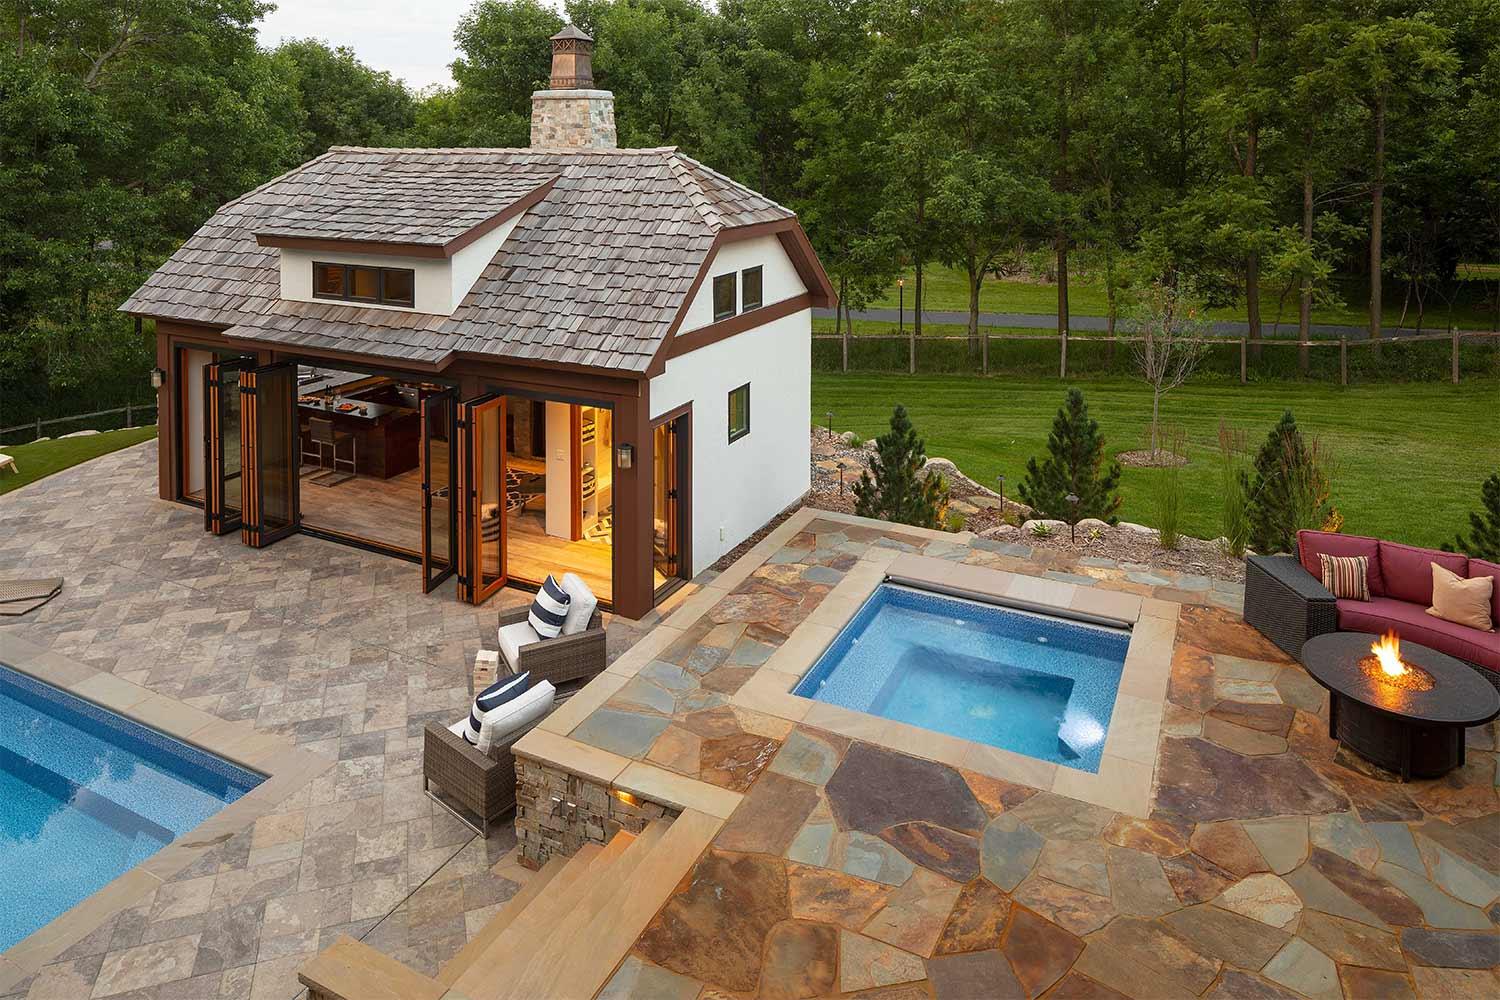 Pool house, hot tub, and natural stone patio and pool deck.